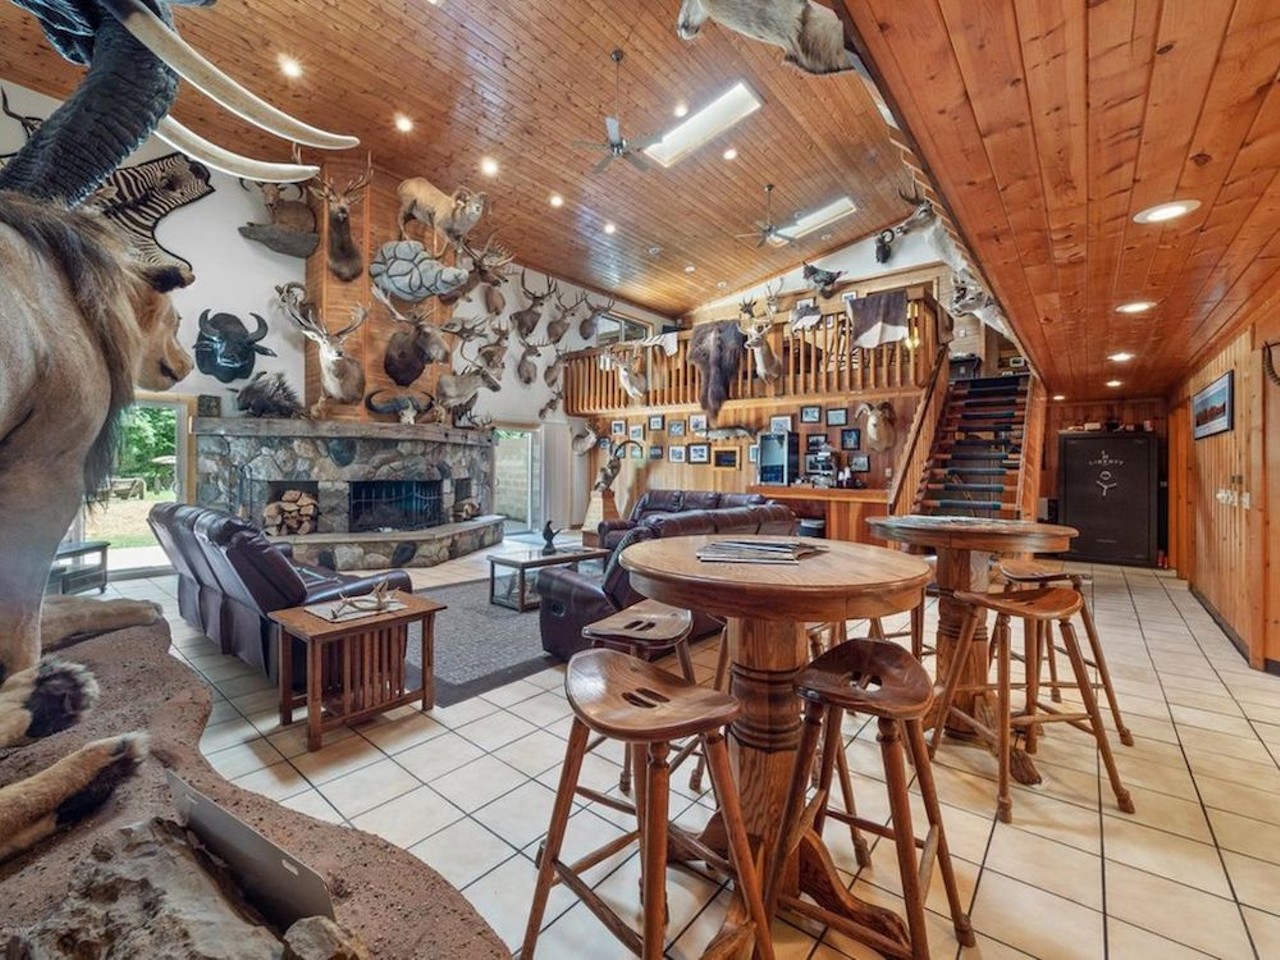 This creepy $2.65 million hunting lodge filled with taxidermy in western Michigan could be new MAGA HQ